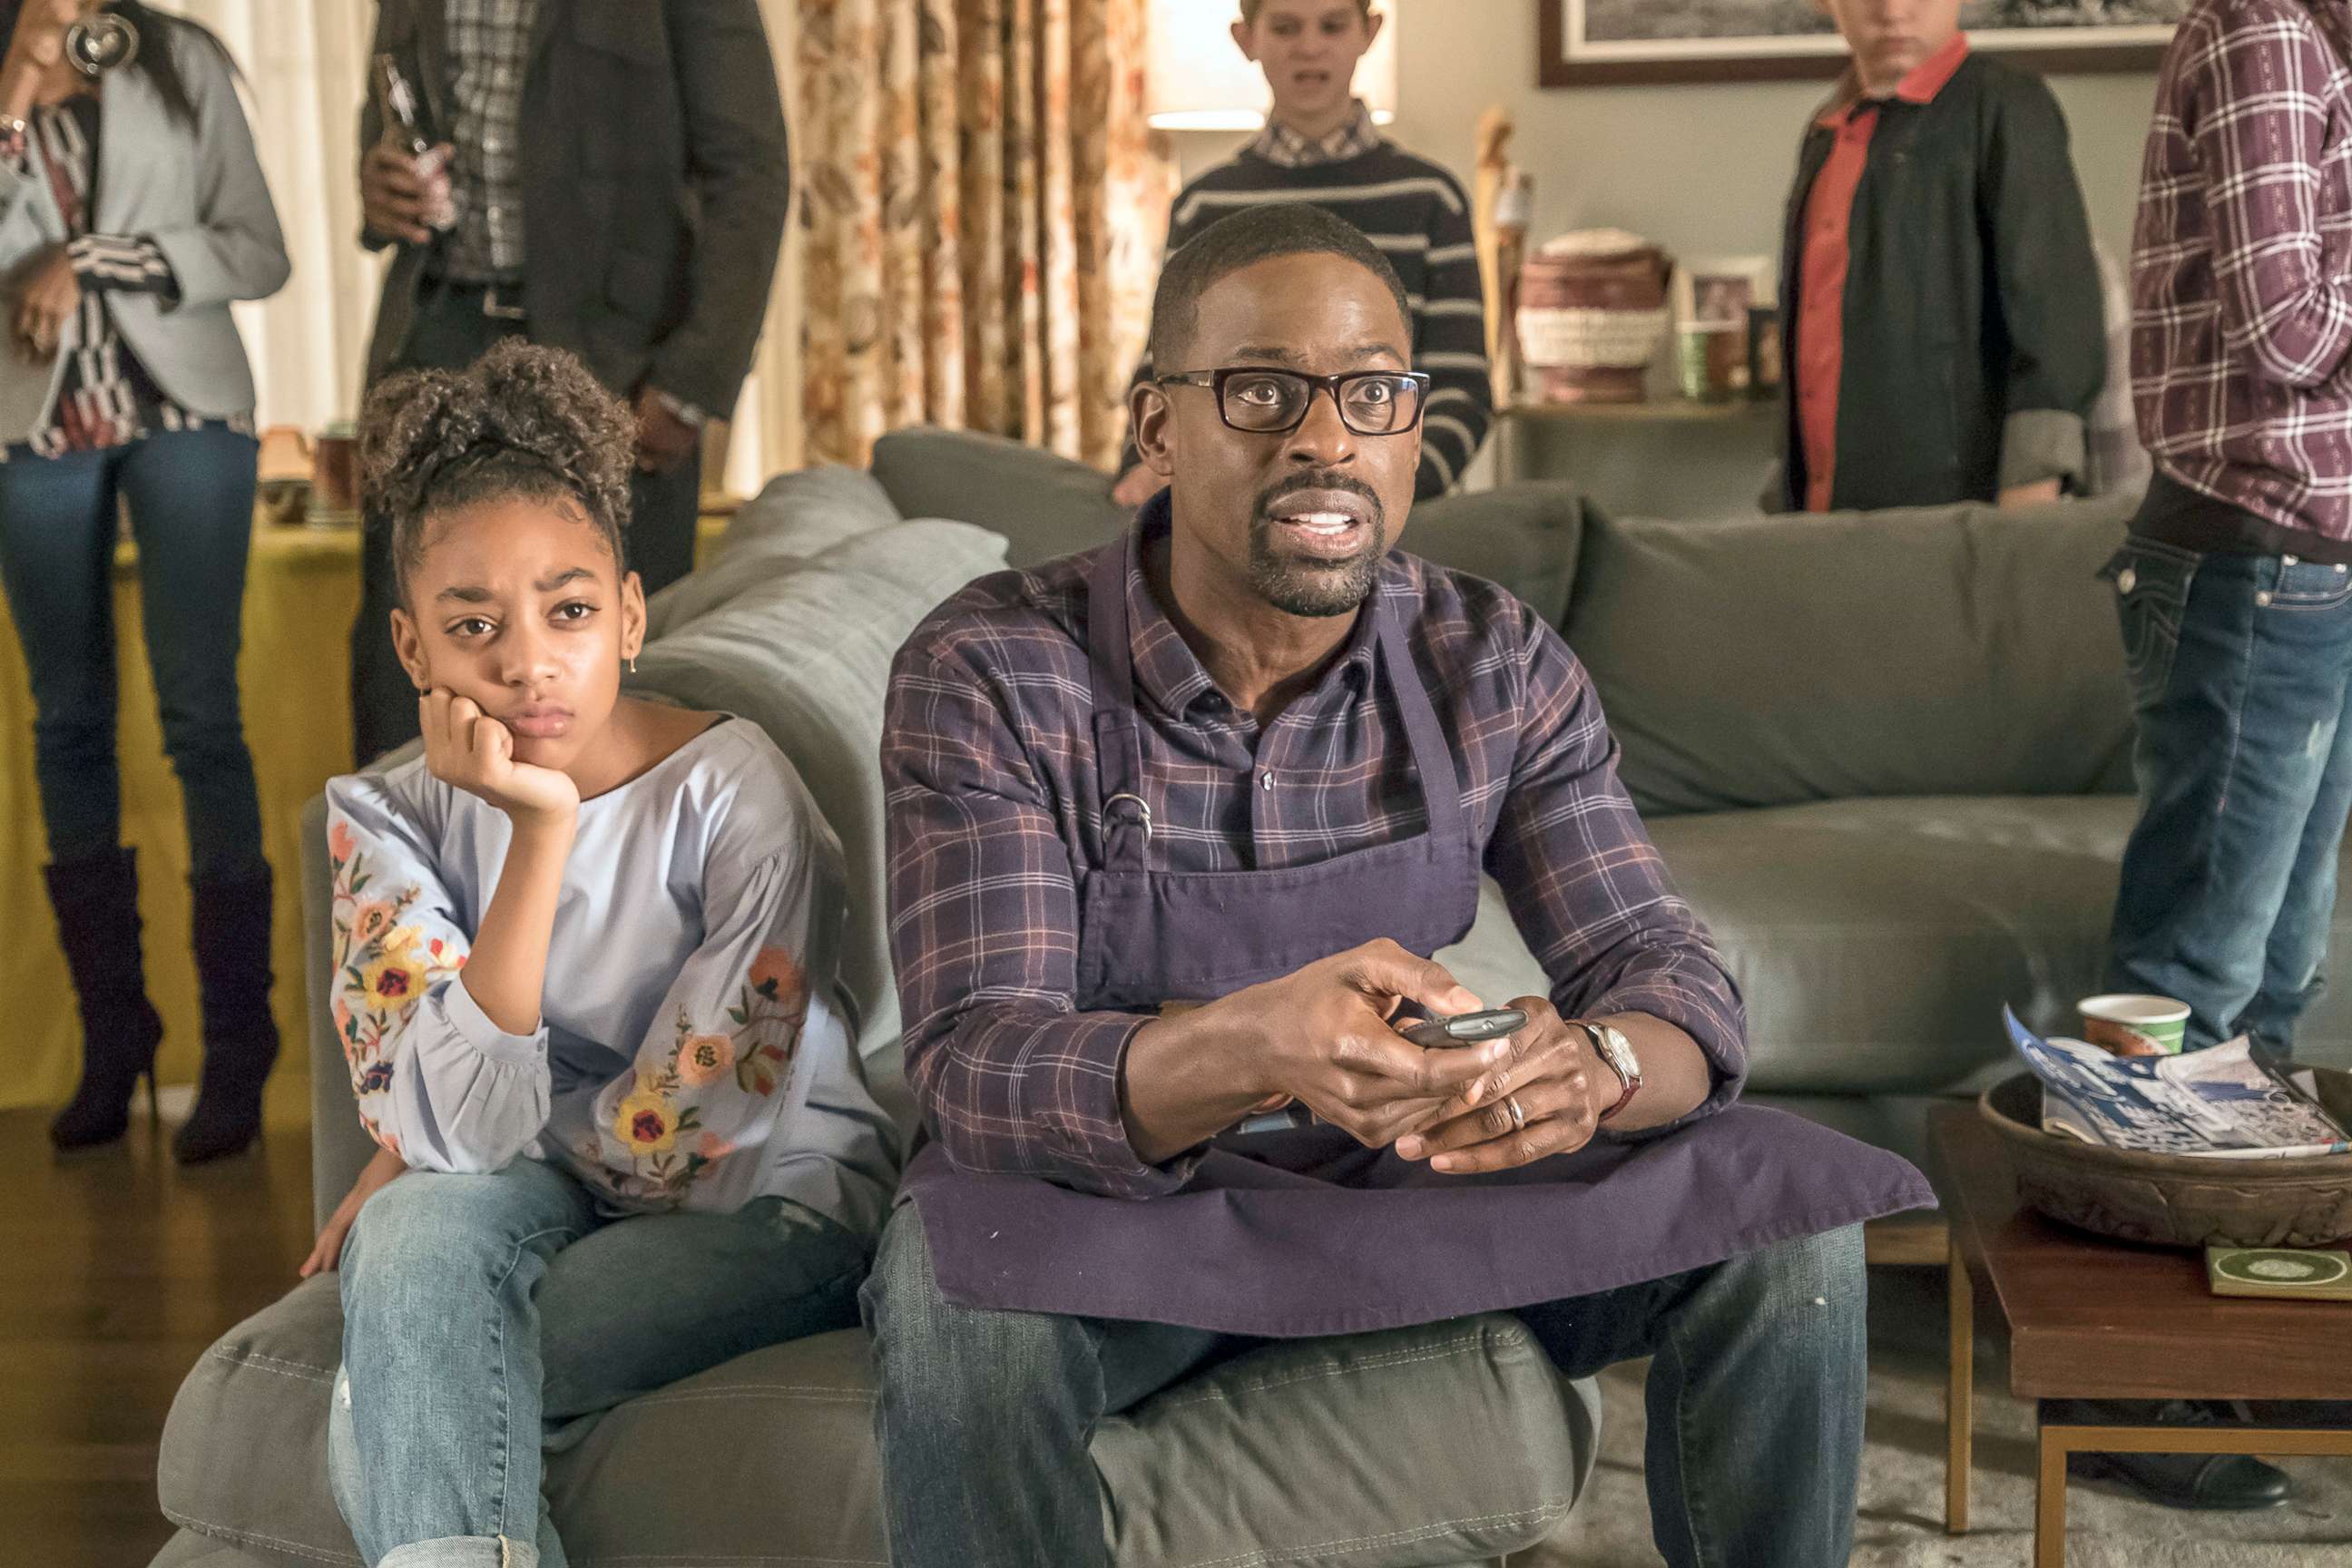 PHOTO: Eris Baker as Tess Pearson, Sterling K. Brown as Randall Pearson in the TV show, "This is Us".